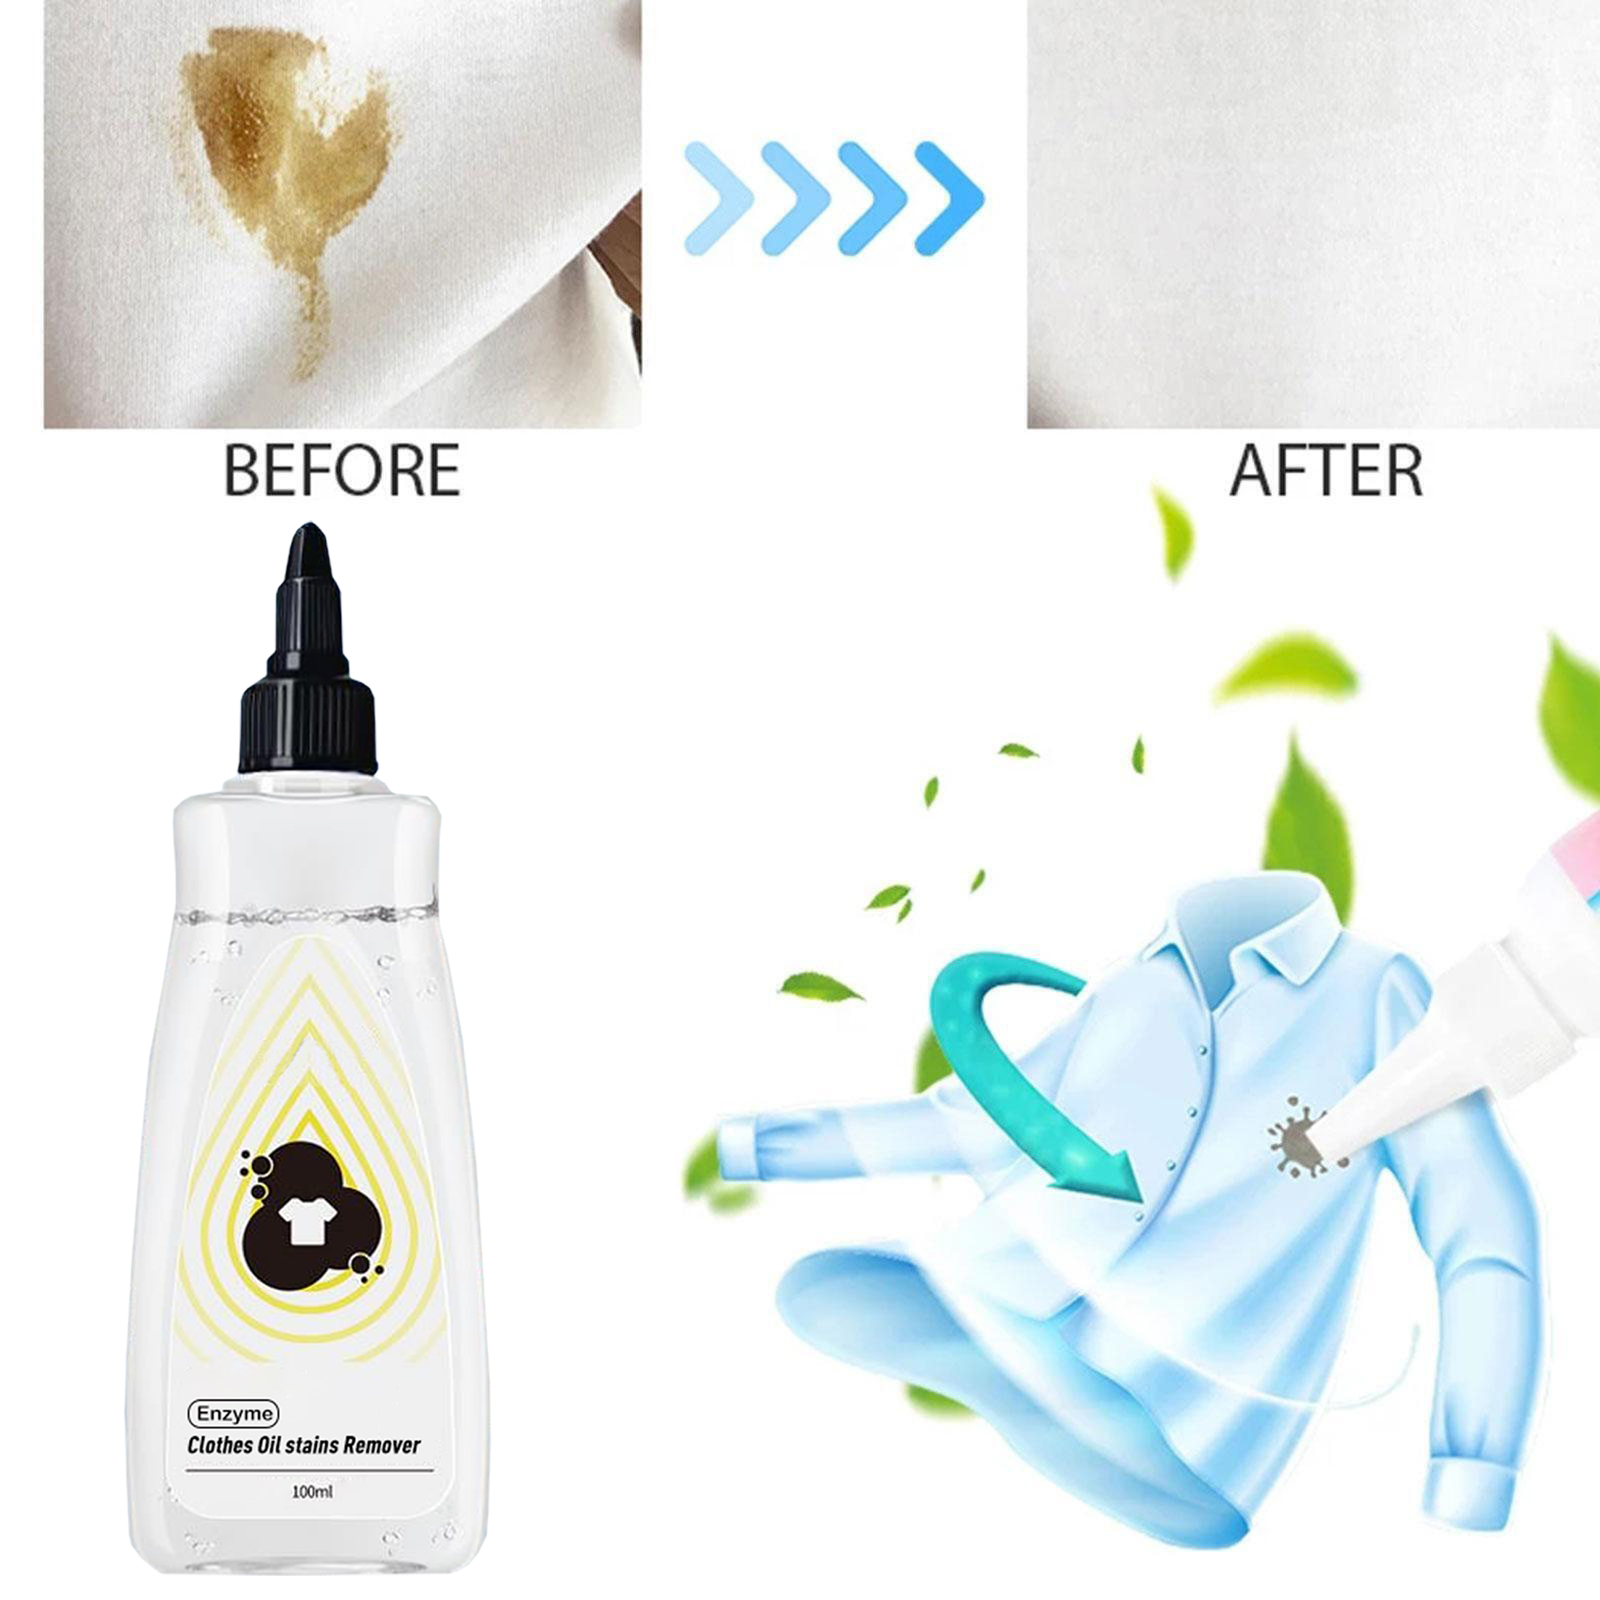 (⏰Last day Sale-60% OFF) Clothes decontamination cleaner